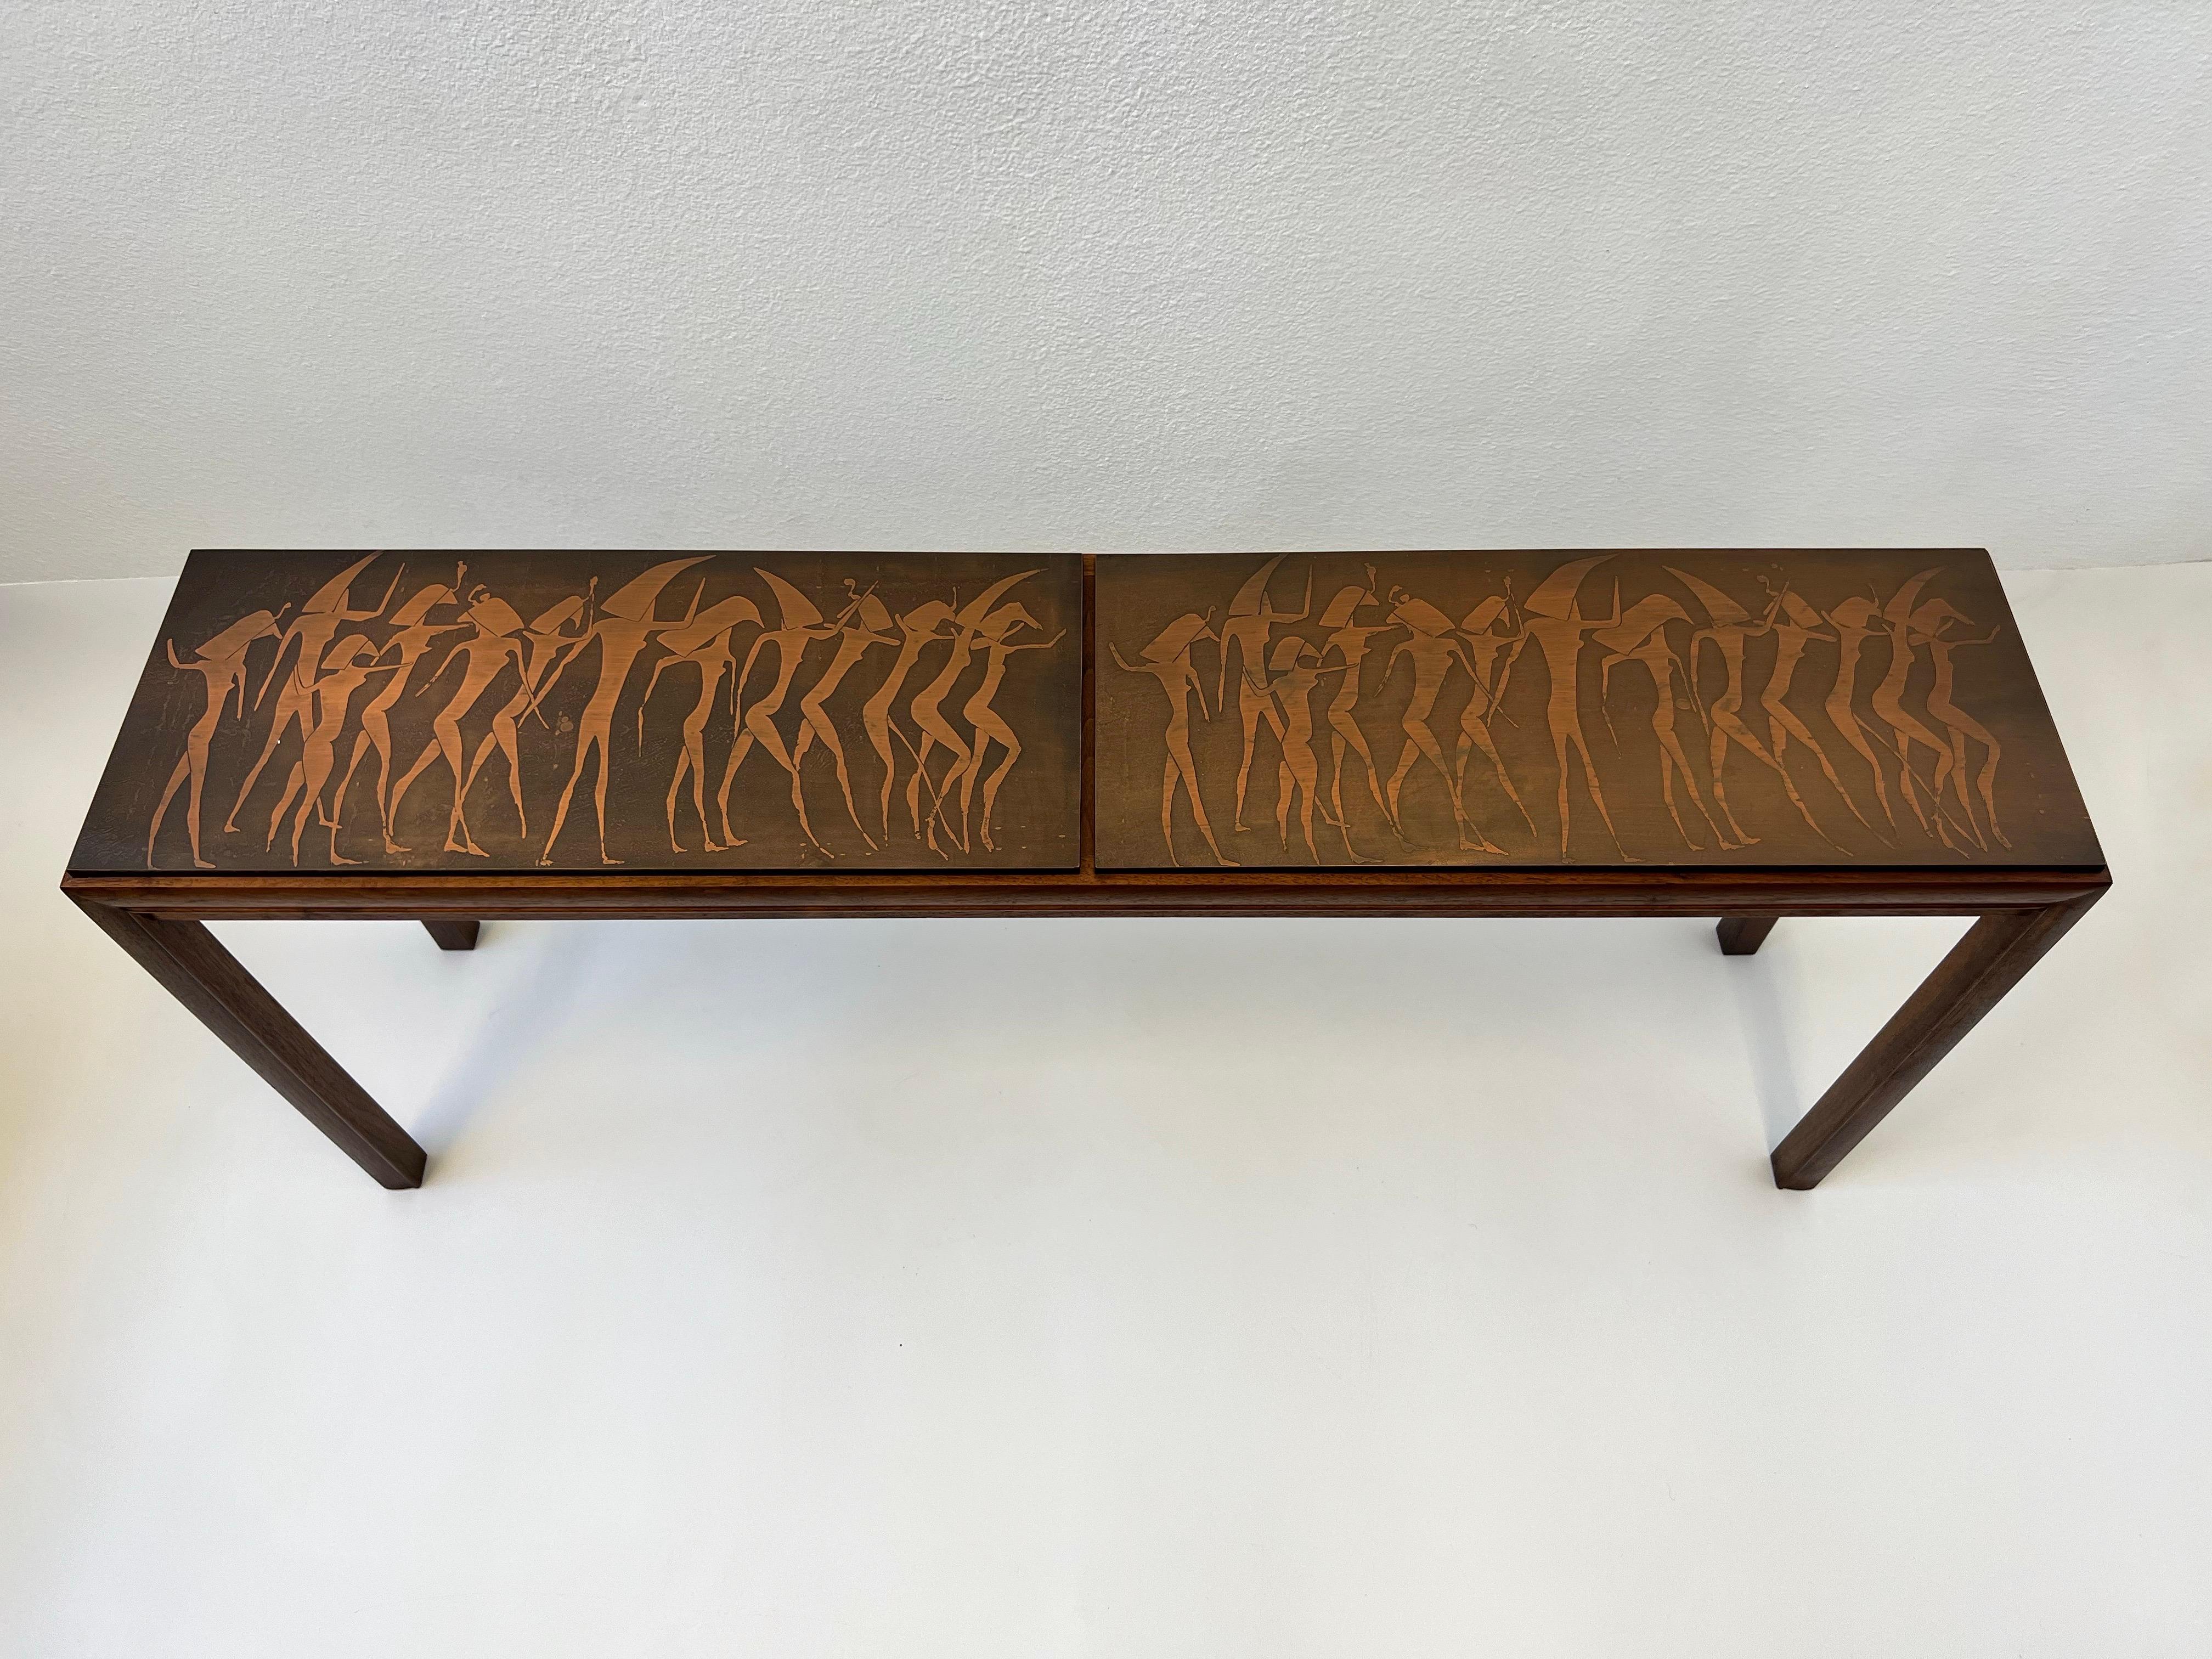 1970s Italian Brutalist walnut and Copper top console table by G. Urso. 
Constructed of solid walnut with a tribal acid etched design copper top.
Hand signed G. Urso Italy.